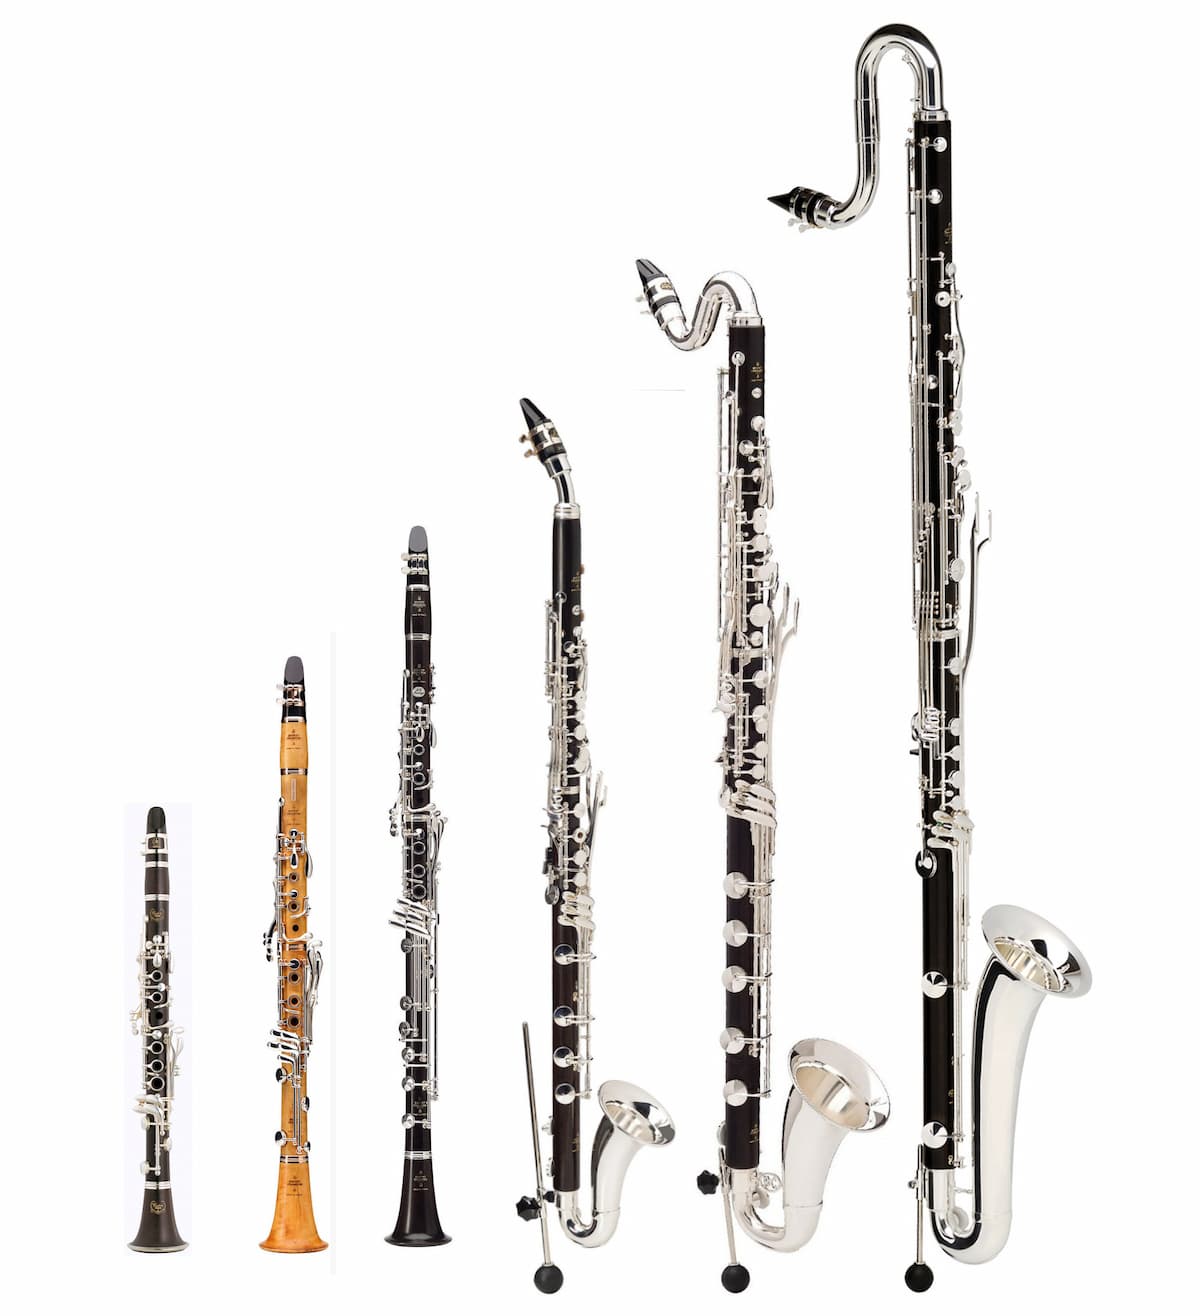 The French Clarinet family